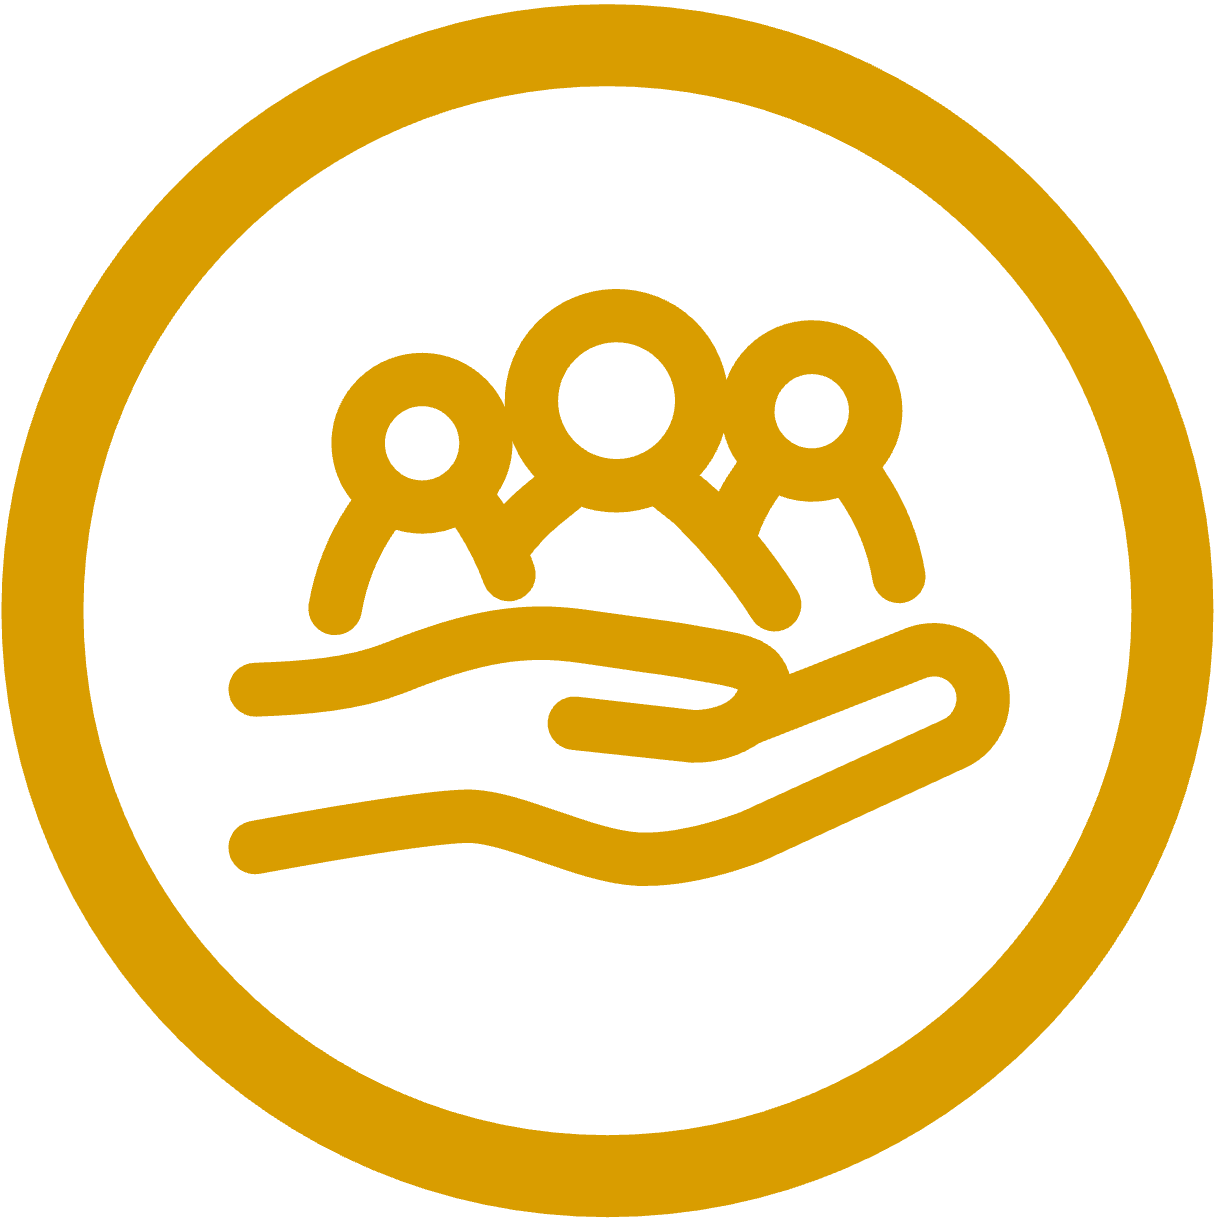 Icon of group of people appearing to be held in a hand